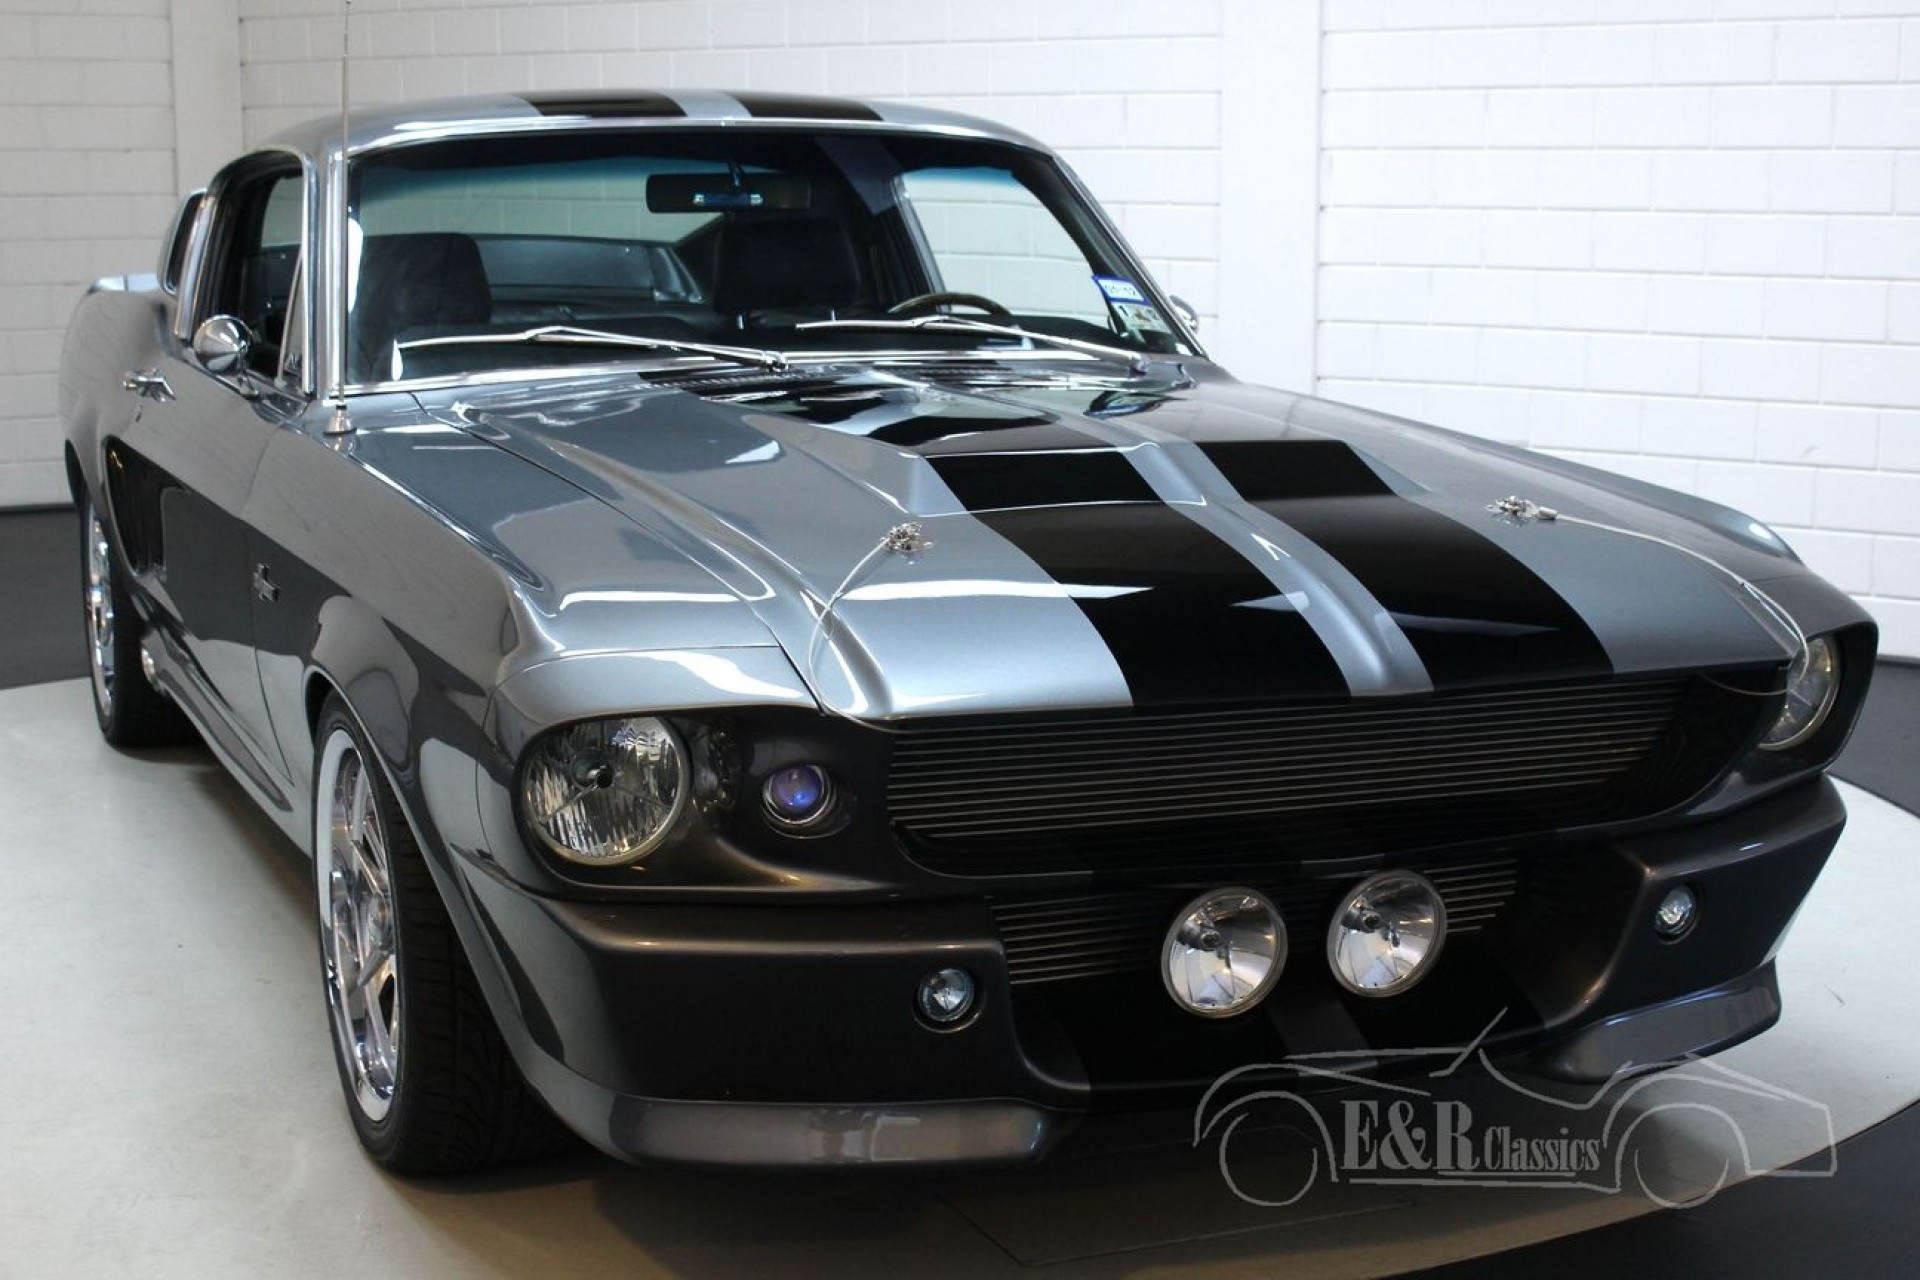 Ford Mustang Fastback Gt500 Shelby ‘eleanor” 1967 à Vendre Chez Erclassics